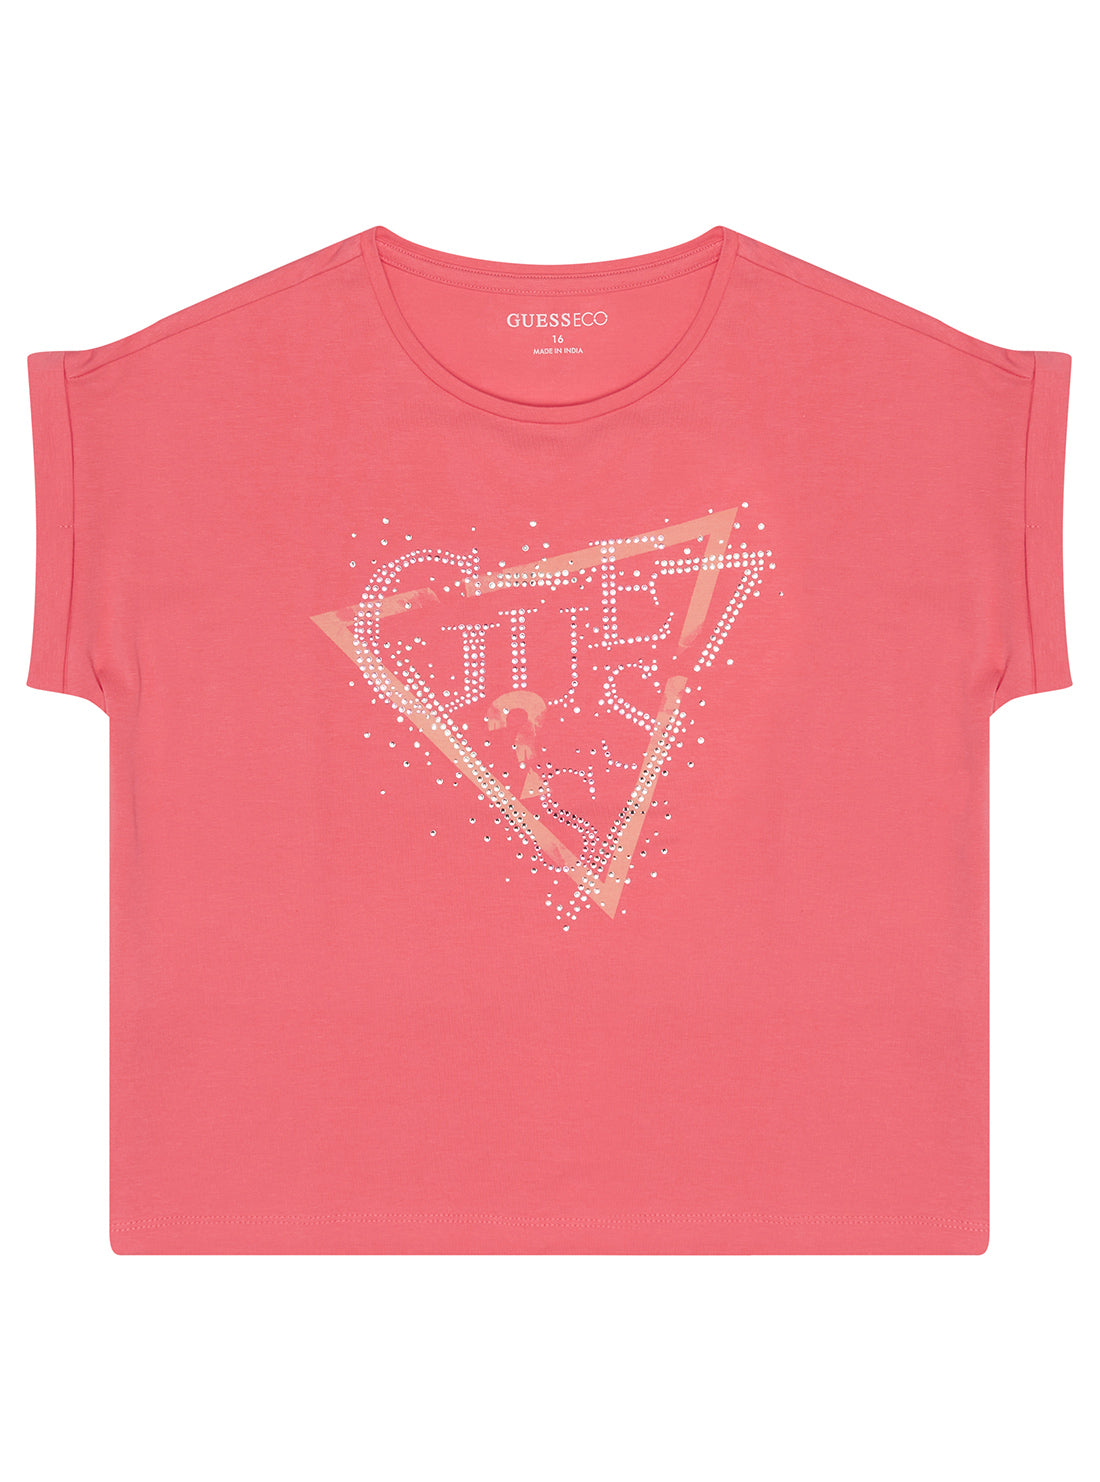 Girl's Pink Crystal Logo T-Shirt front view